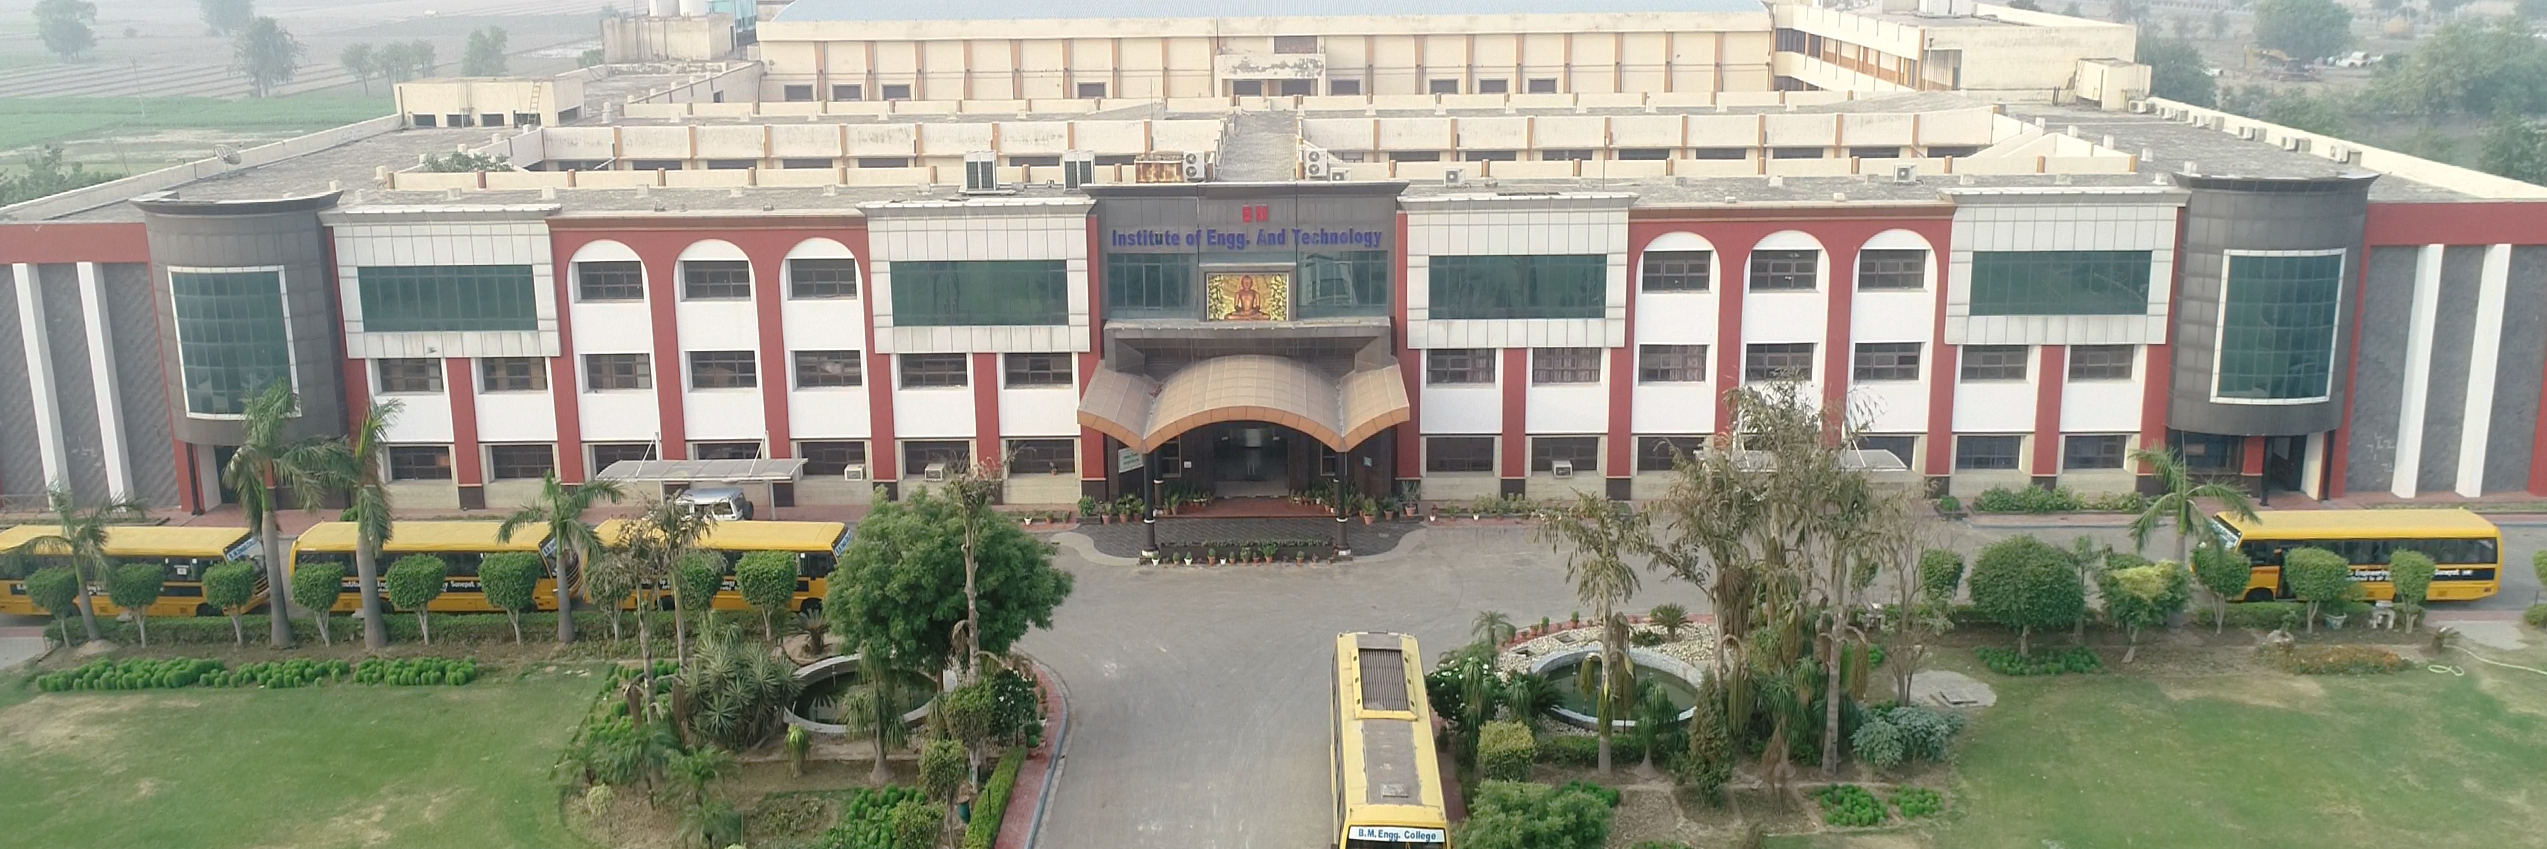 B. M. Institute of Engineering and Technology, Sonipat